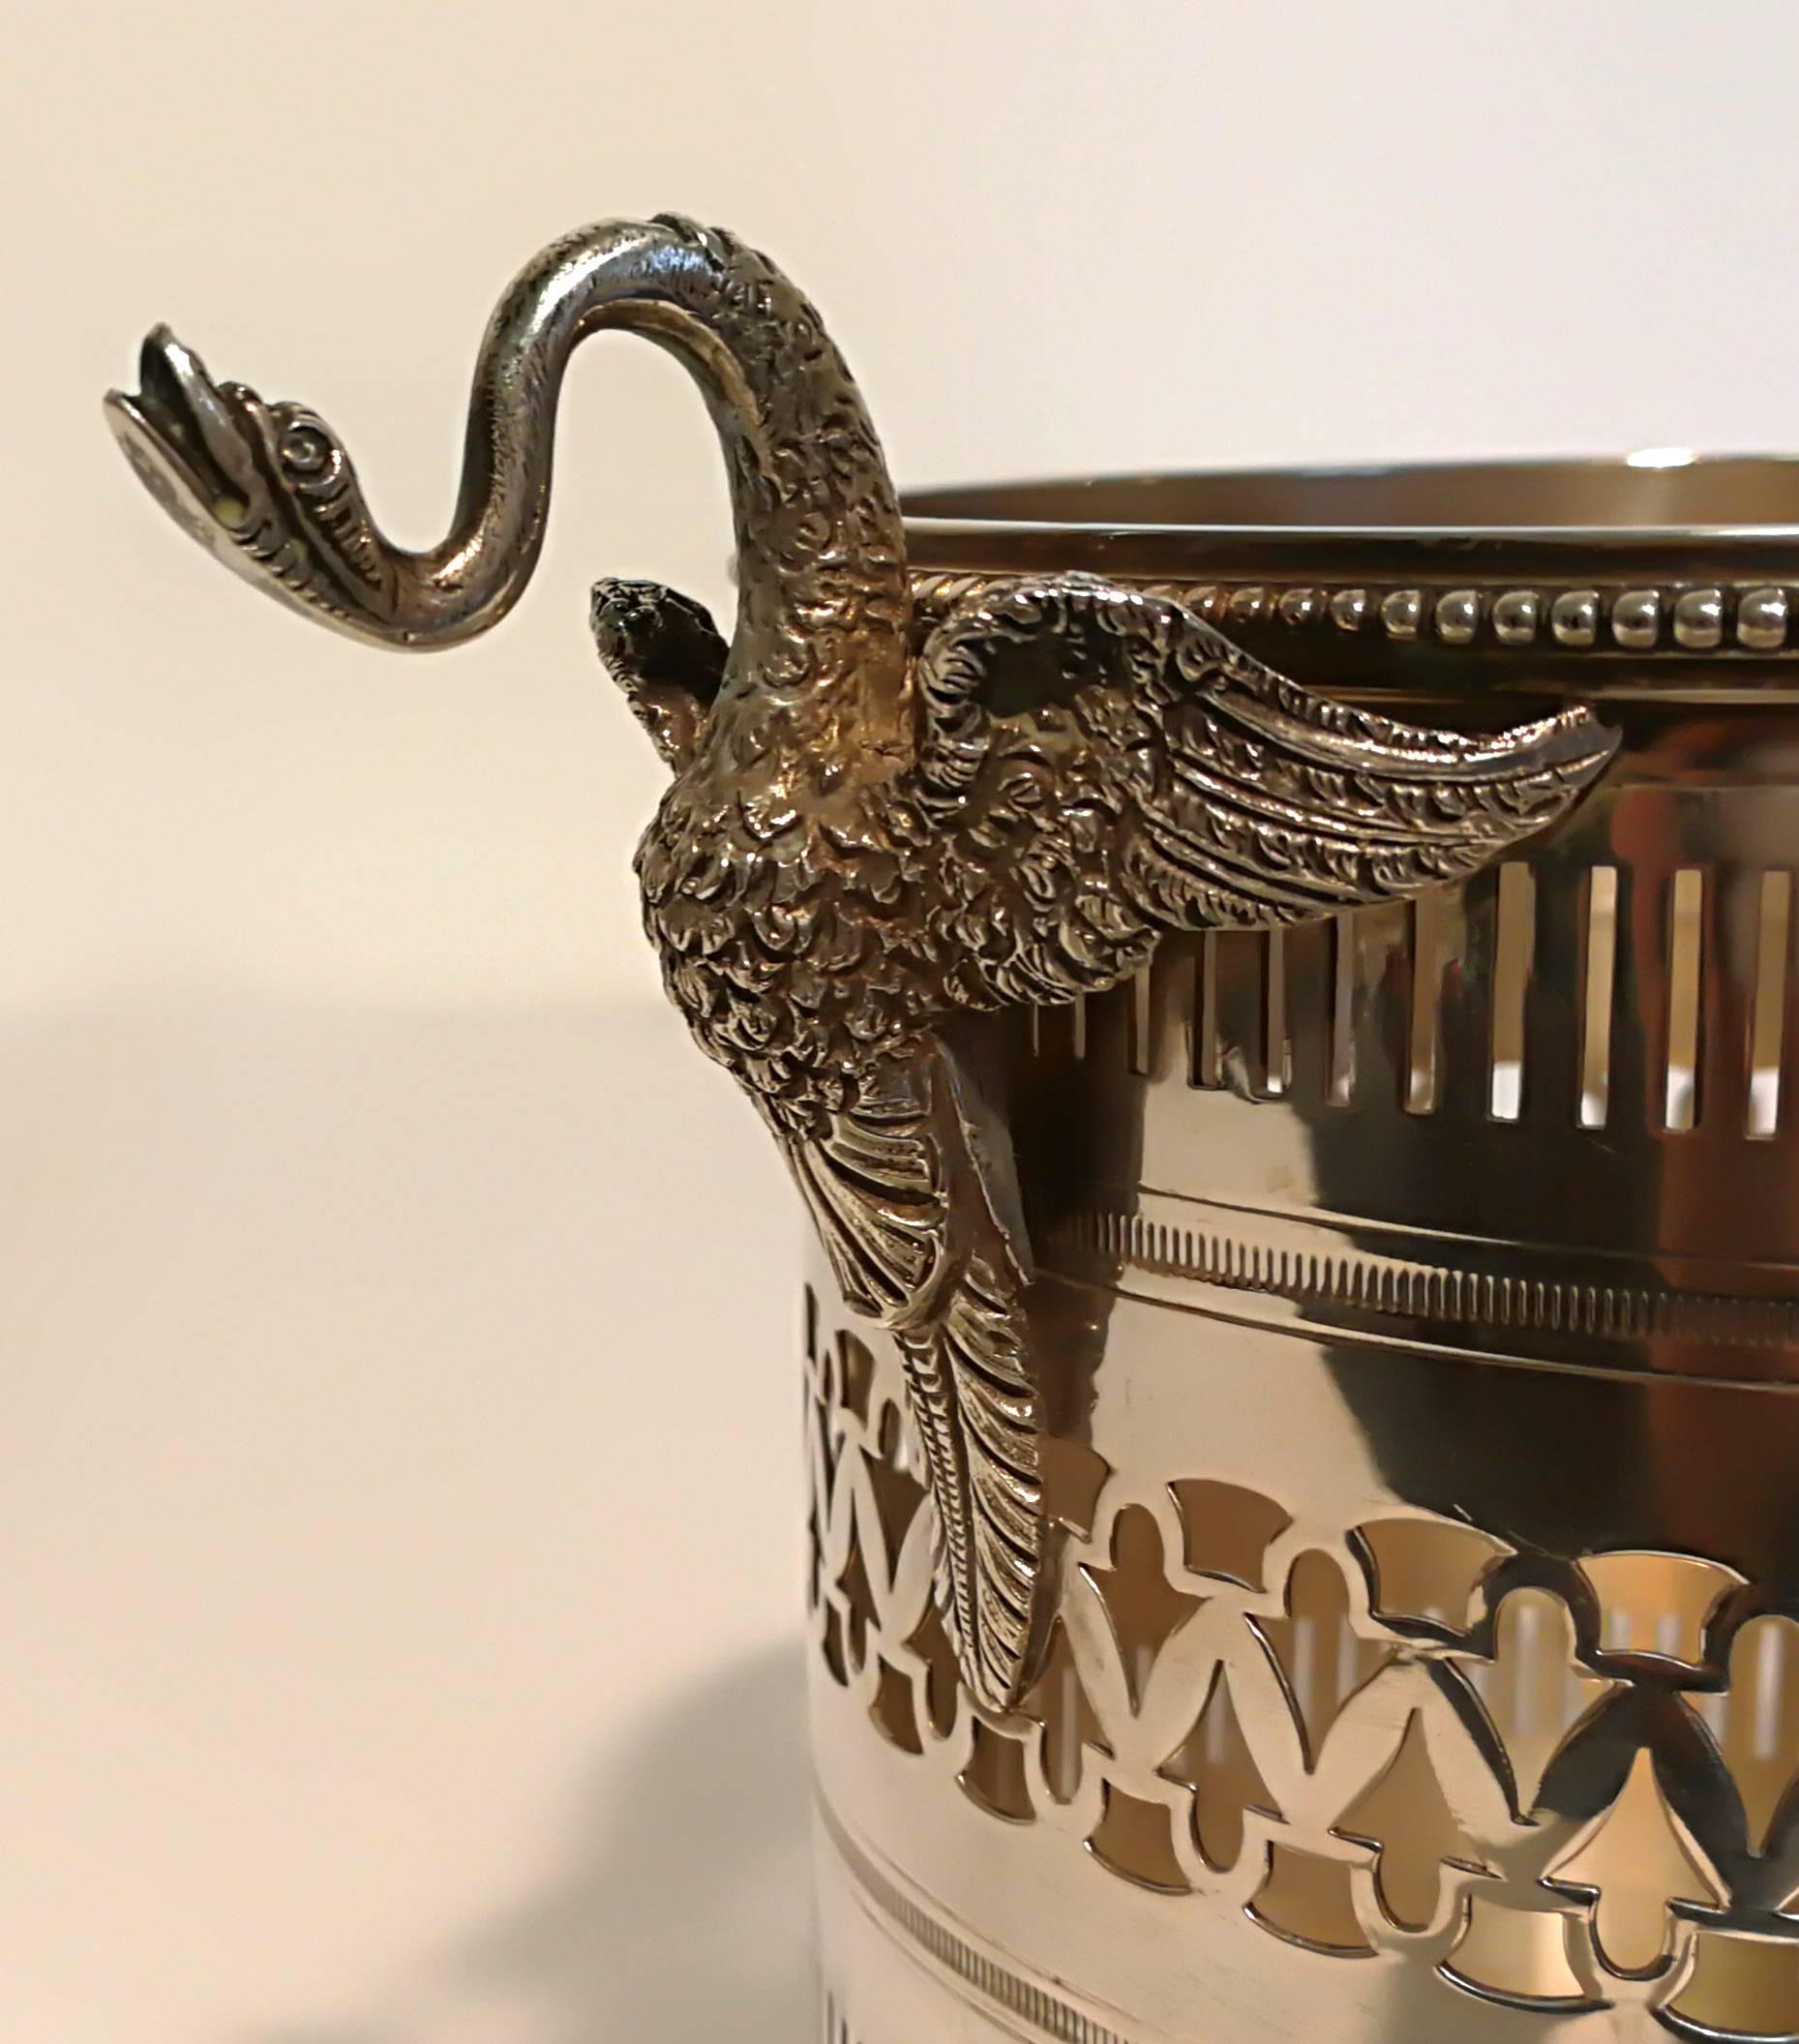 Beautifully decorated silver wine cooler with swan handles. Nicely perforated silver, Italian goldsmithery.